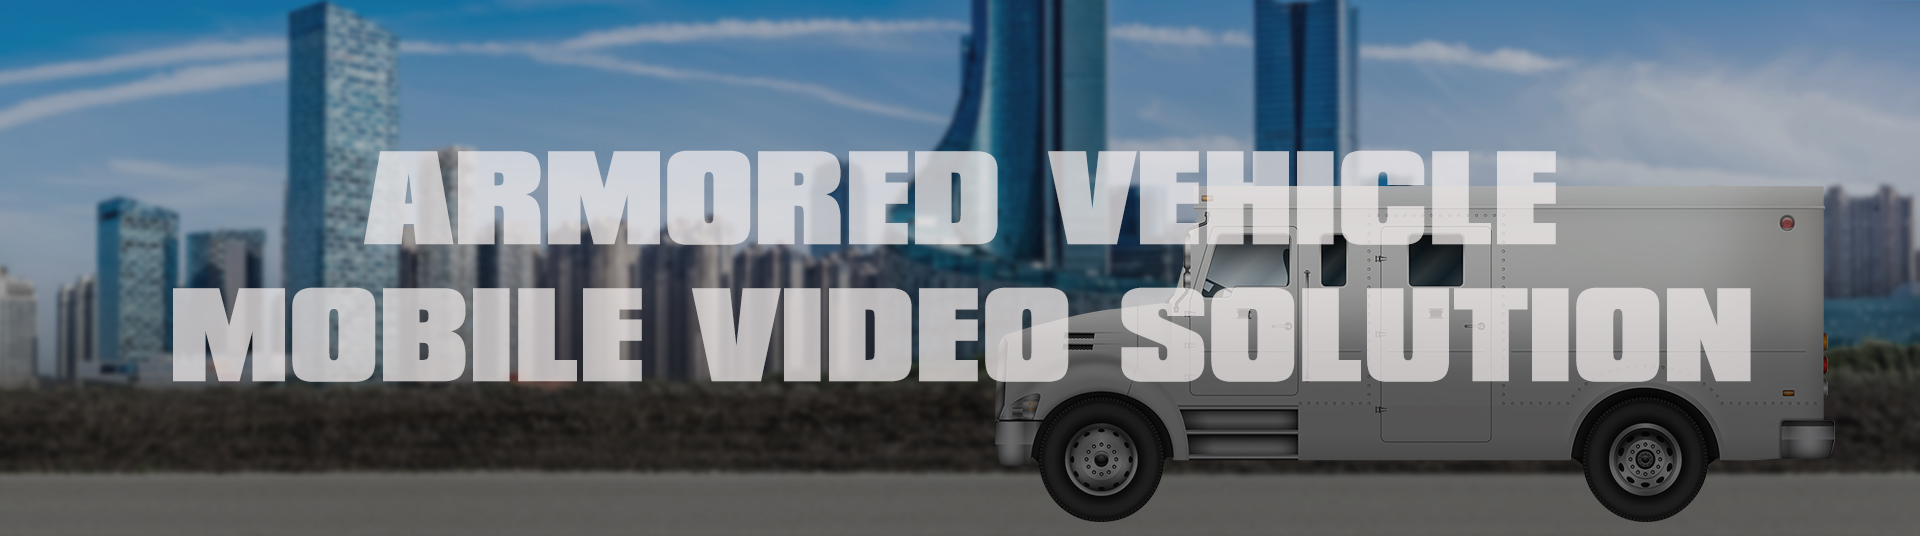 ARMORED VEHICLE MOBILE VIDEO SOLUTION